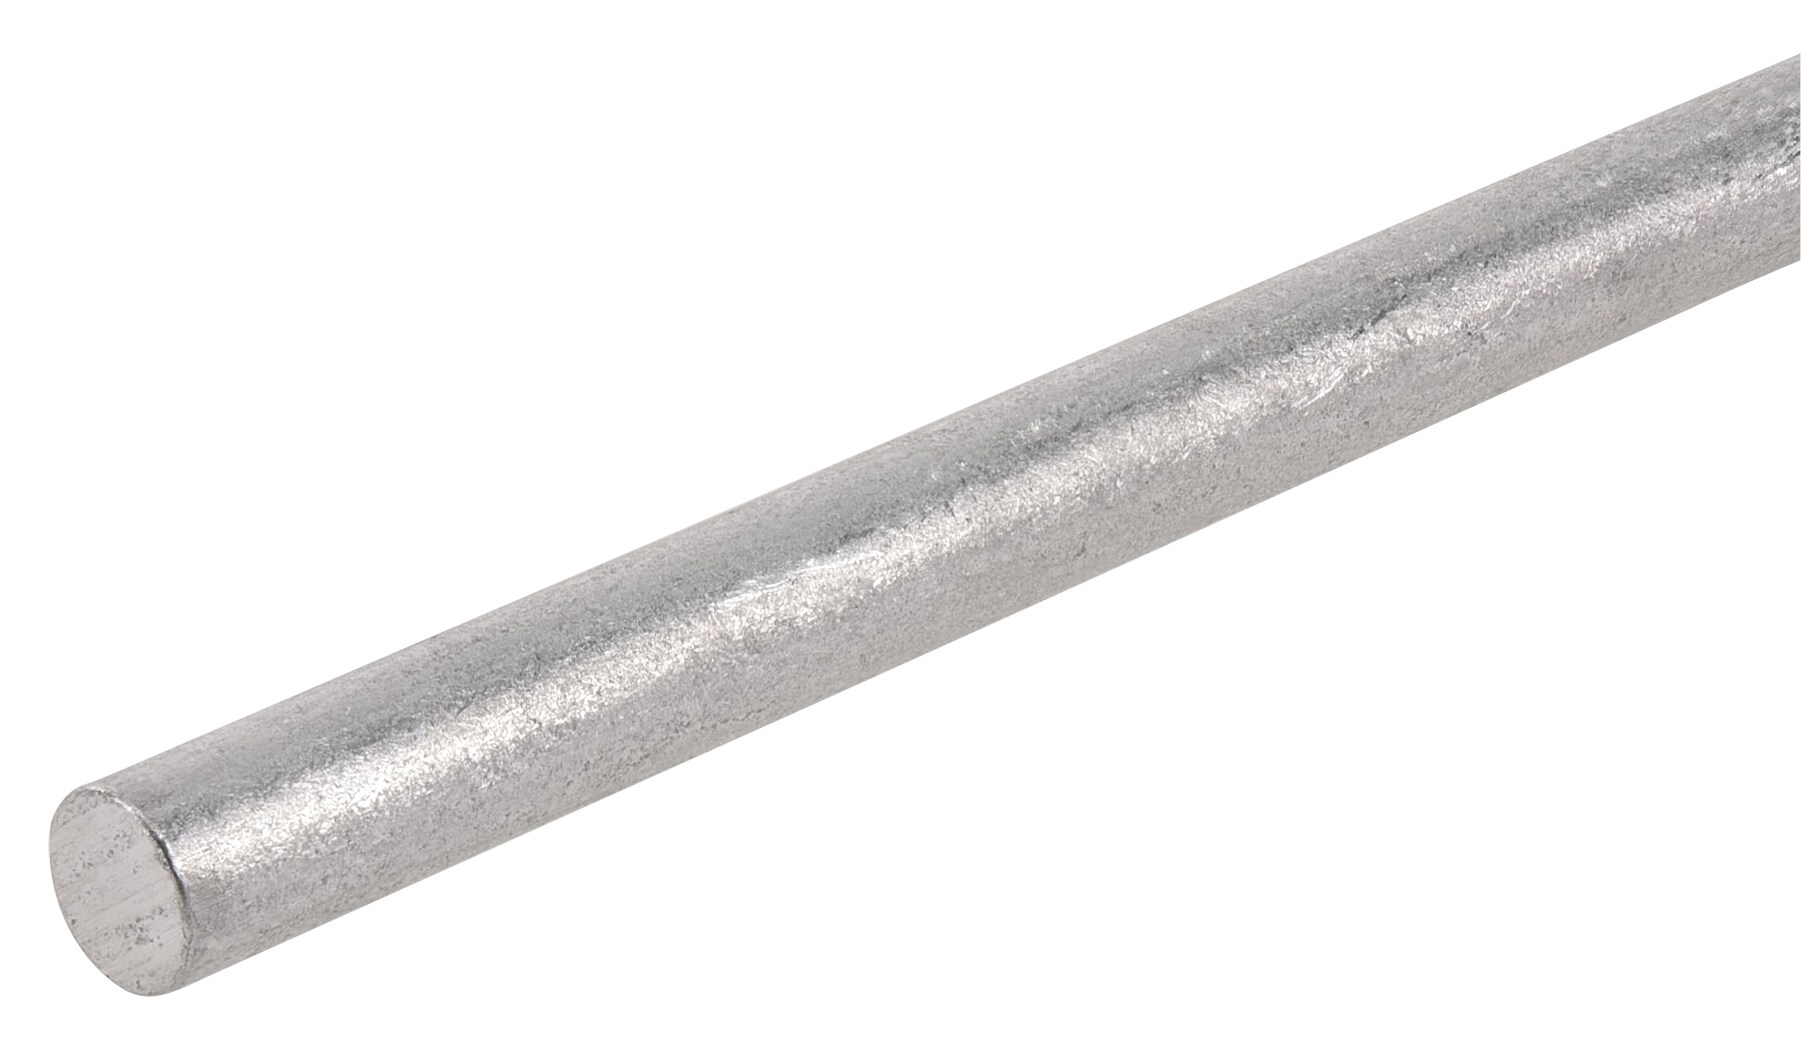 Made in USA 0.125 in OD 1 pc K&S Precision Metals 83043 Solid Round Aluminum Rod 1/8 OD x 12 Length 